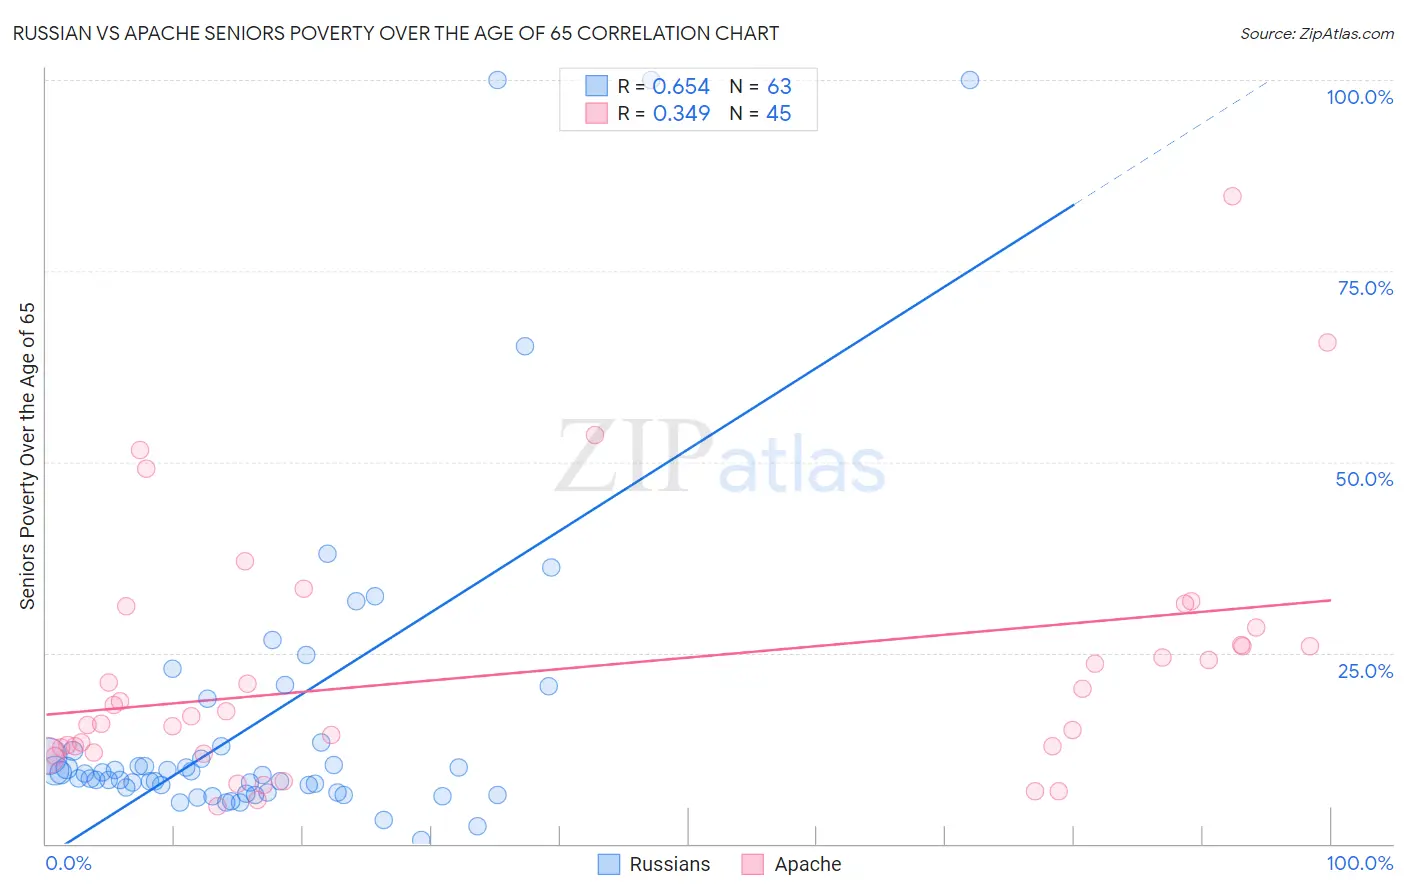 Russian vs Apache Seniors Poverty Over the Age of 65